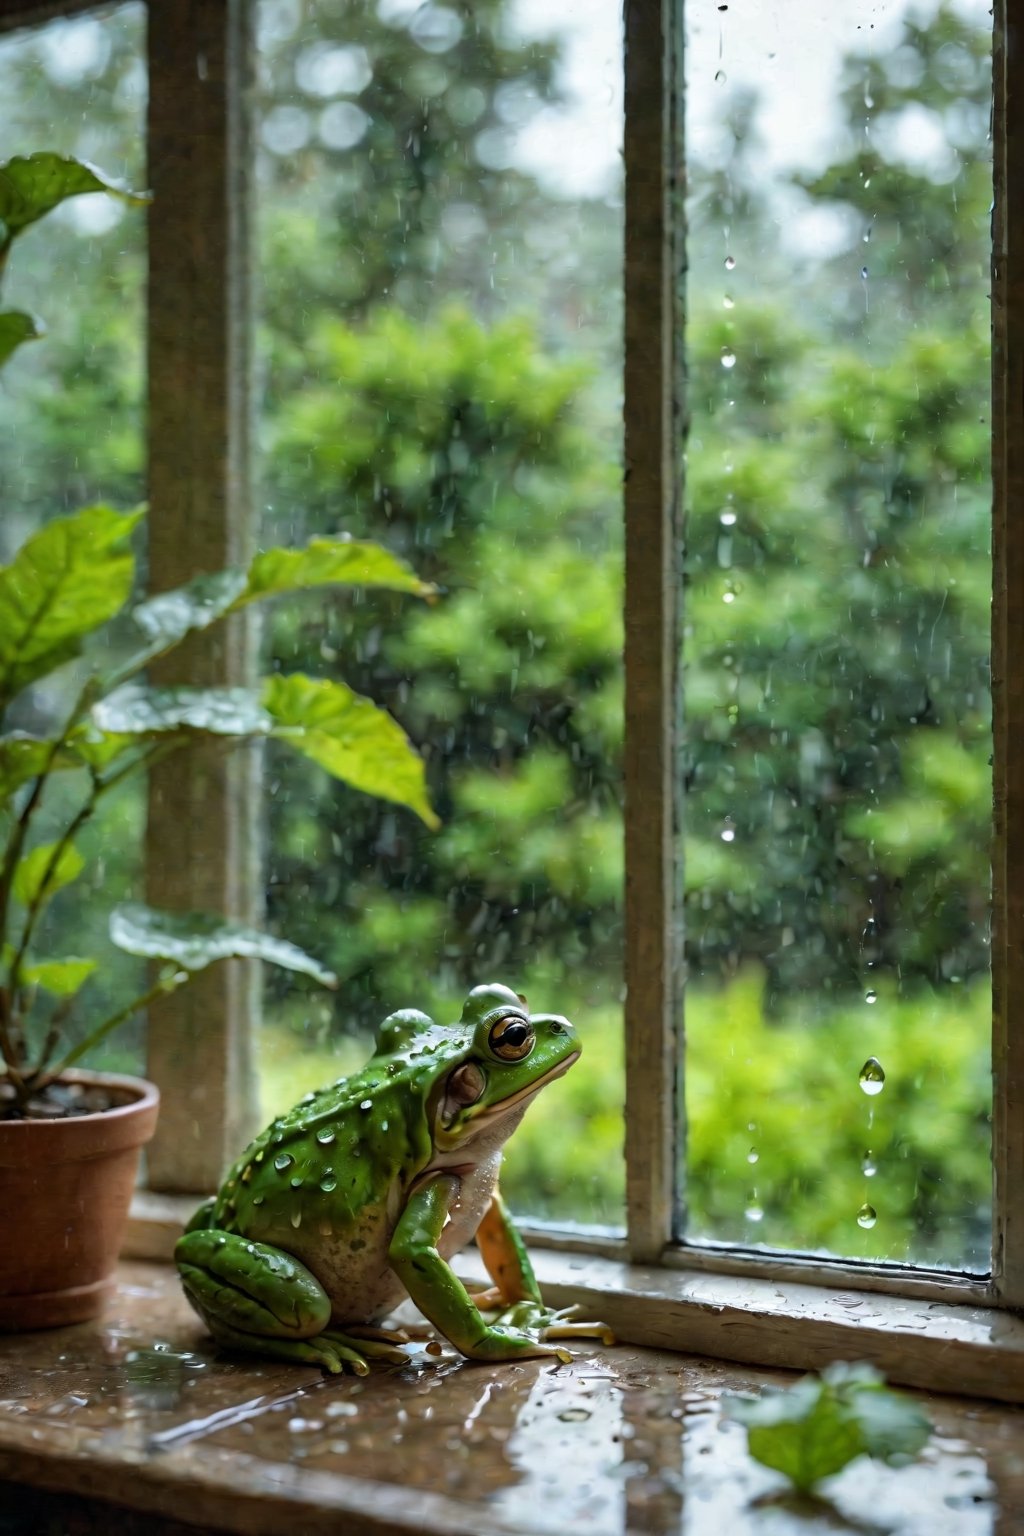 (best quality,4k,8k,highres,masterpiece:1.2),ultra-detailed,(realistic,photorealistic,photo-realistic:1.37),indoor,window,raining,water droplets,frog,lofi vibe,beautiful view,serene atmosphere,soft light,cozy interior,calmness,comfortable ambiance,dreamy scenery,subtle reflections,peaceful color palette,tranquil experience,lovely frog on the windowsill,glistening water droplets on the glass,gentle raindrops tapping on the window,green foliage outside the window,ethereal mist in the distance,ambient music playing in the background,serenity captured through the rain-speckled window pane